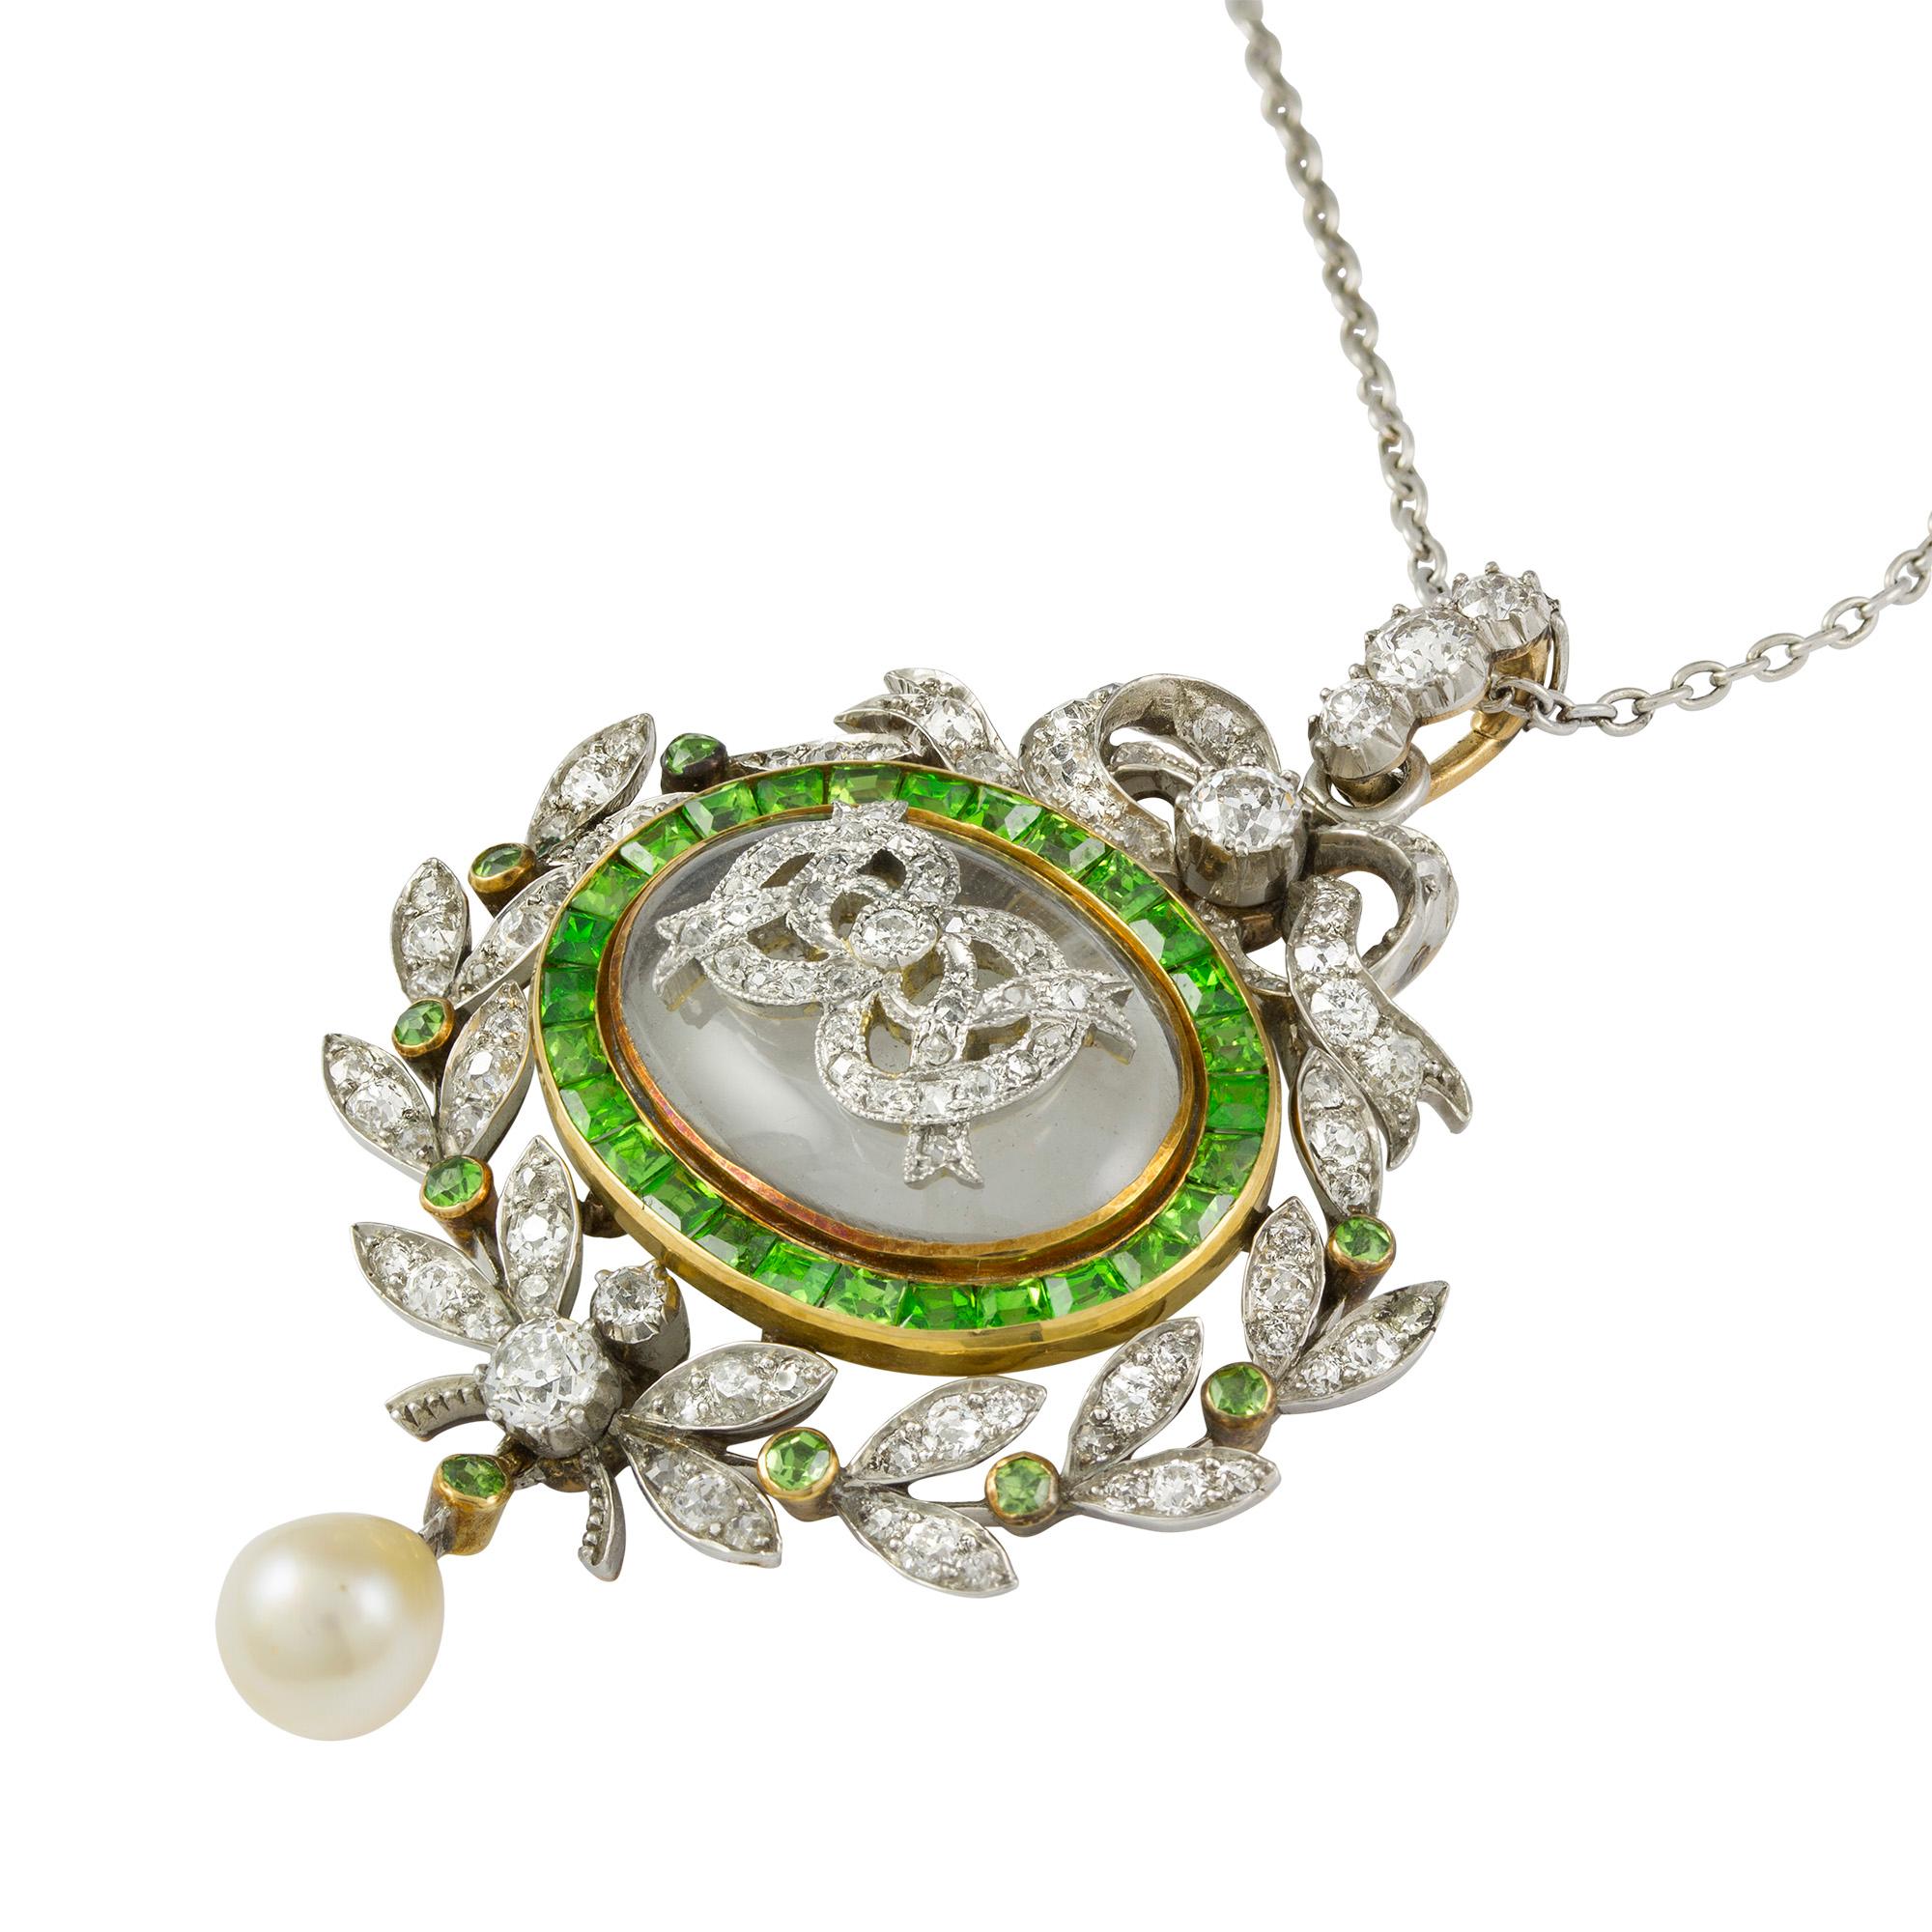 An Edwardian diamond and demantoid garnet-set pendant, to the centre an oval cabochon-cut rock crystal applied with diamond-set ribbon-like decorations, surrounded by twenty-eight calibre-cut demantoid garnets, within a diamond-set wreath flanked